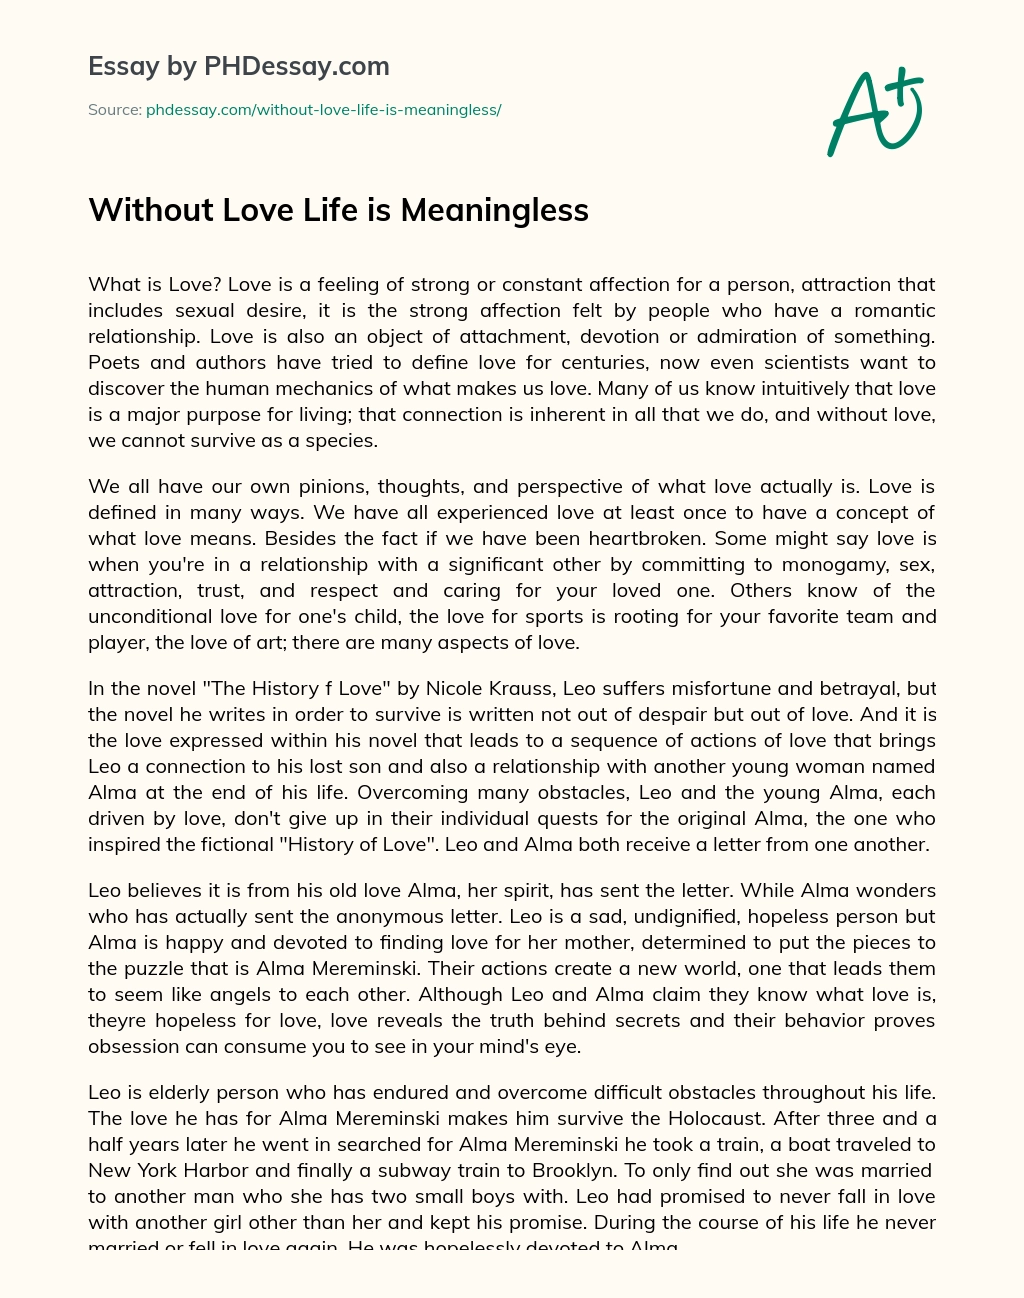 Without Love Life is Meaningless essay